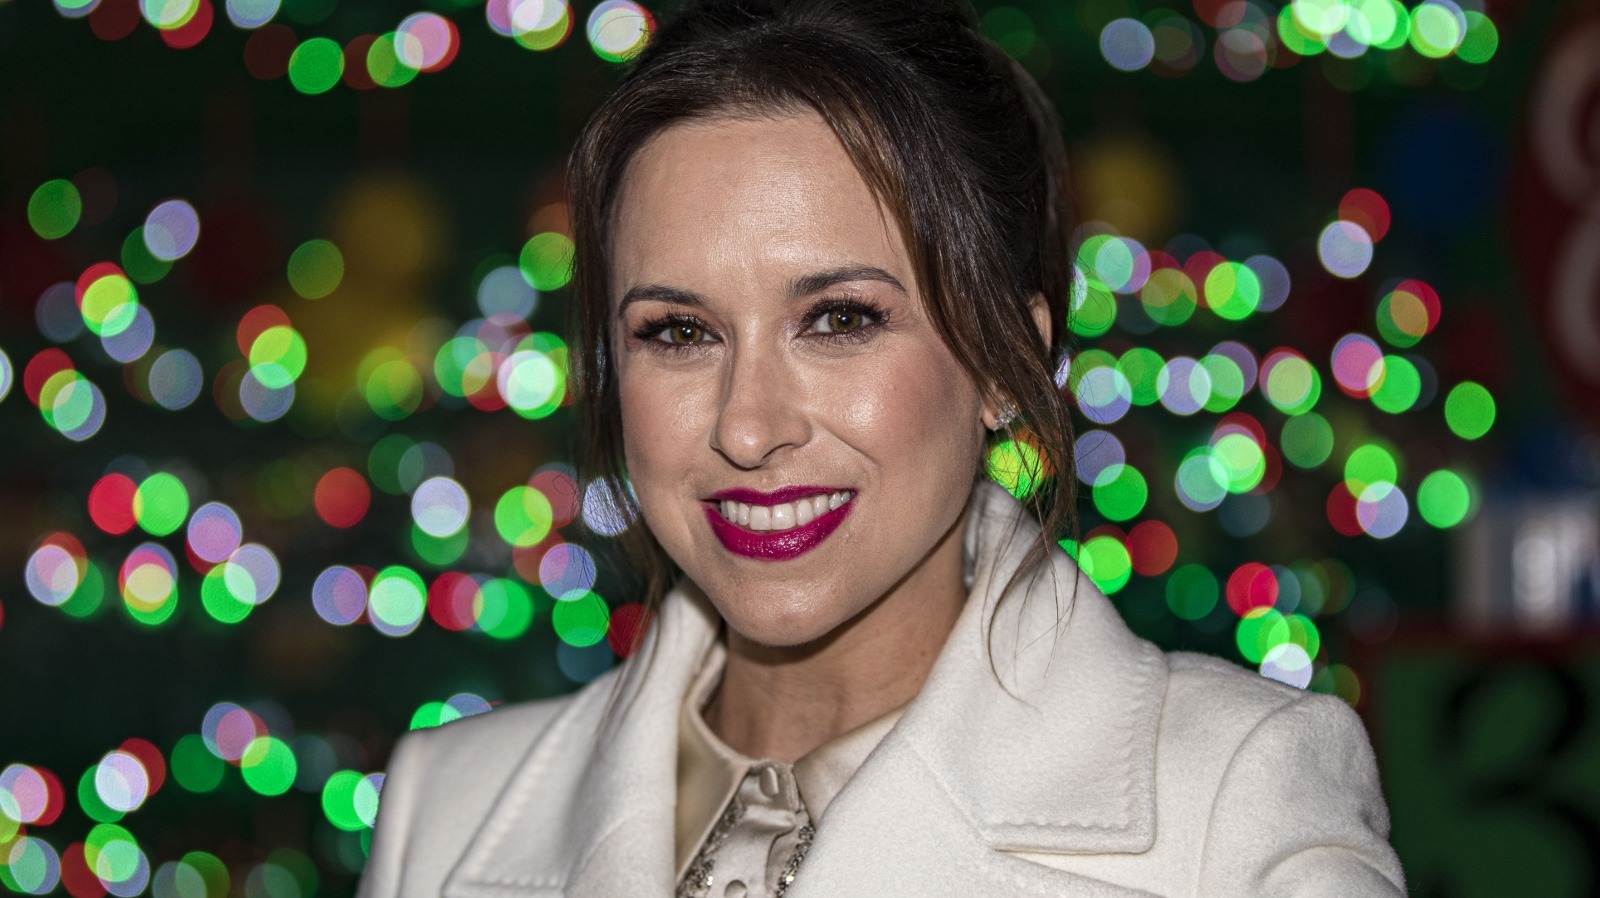 Hallmark Christmas Movie Queen Lacey Chabert On The 'Fast And Furious